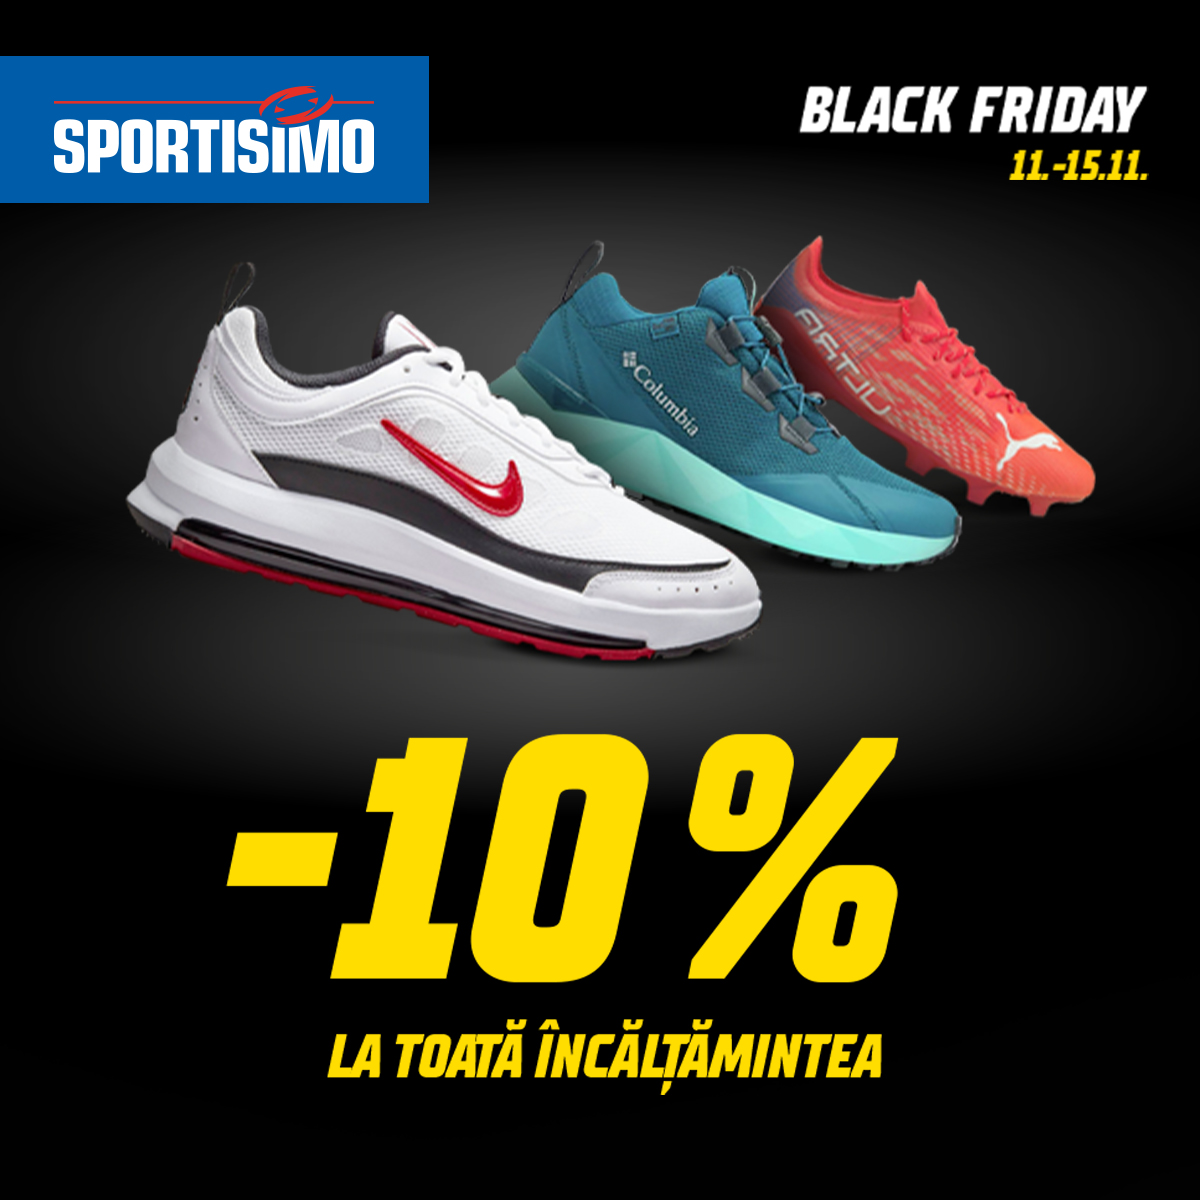 You are currently viewing SPORTISIMO : Black Friday!